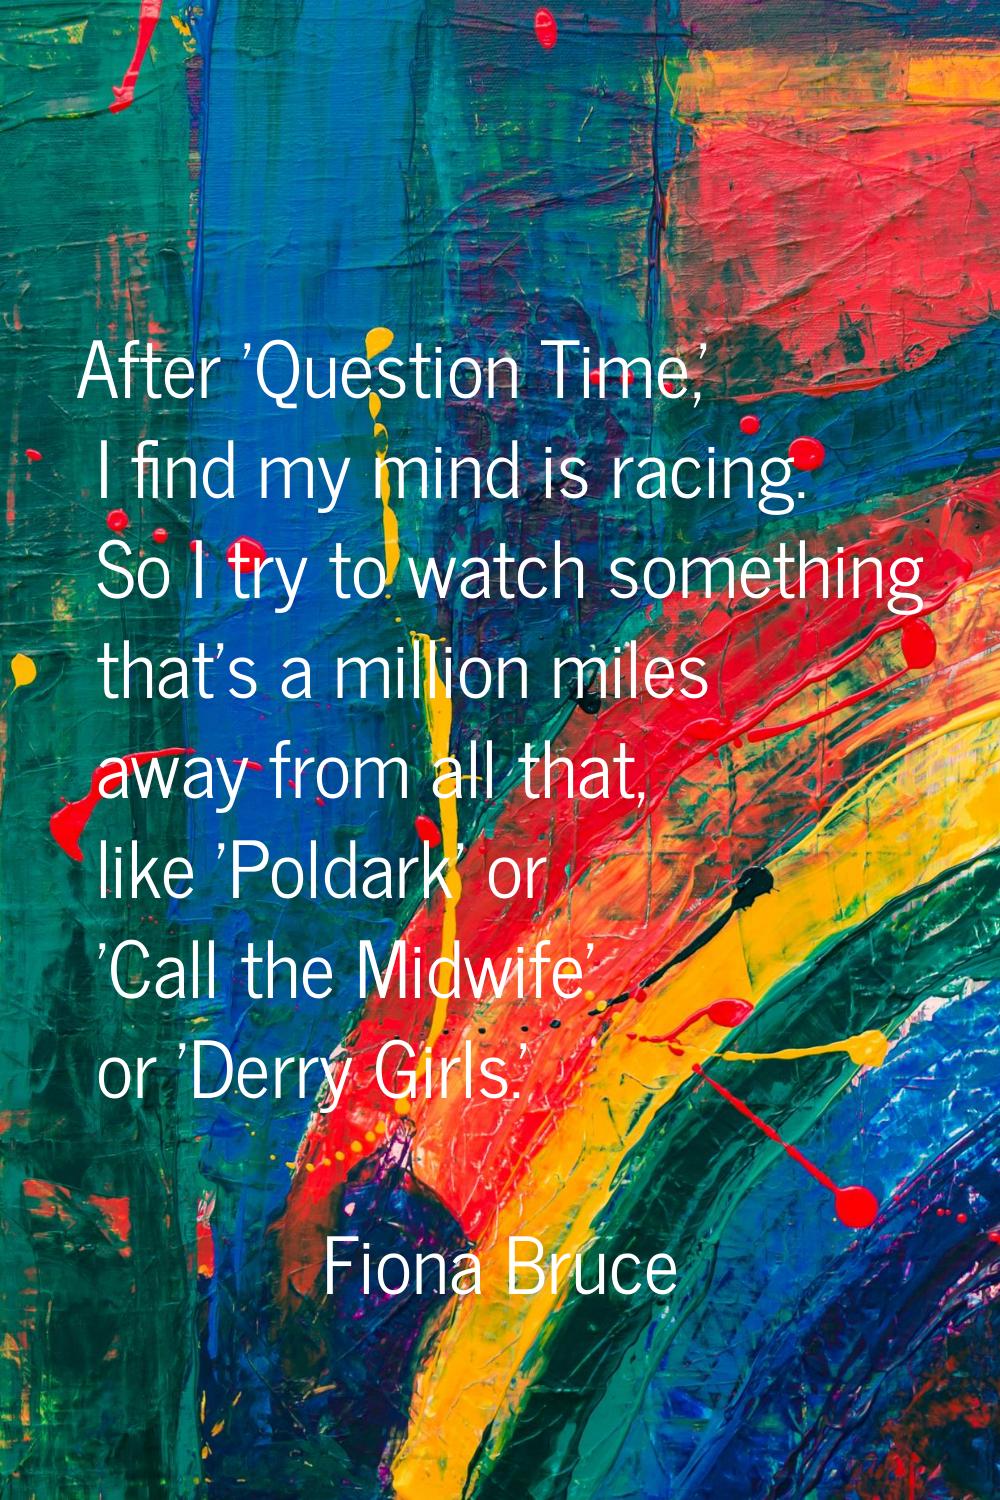 After 'Question Time,' I find my mind is racing. So I try to watch something that's a million miles